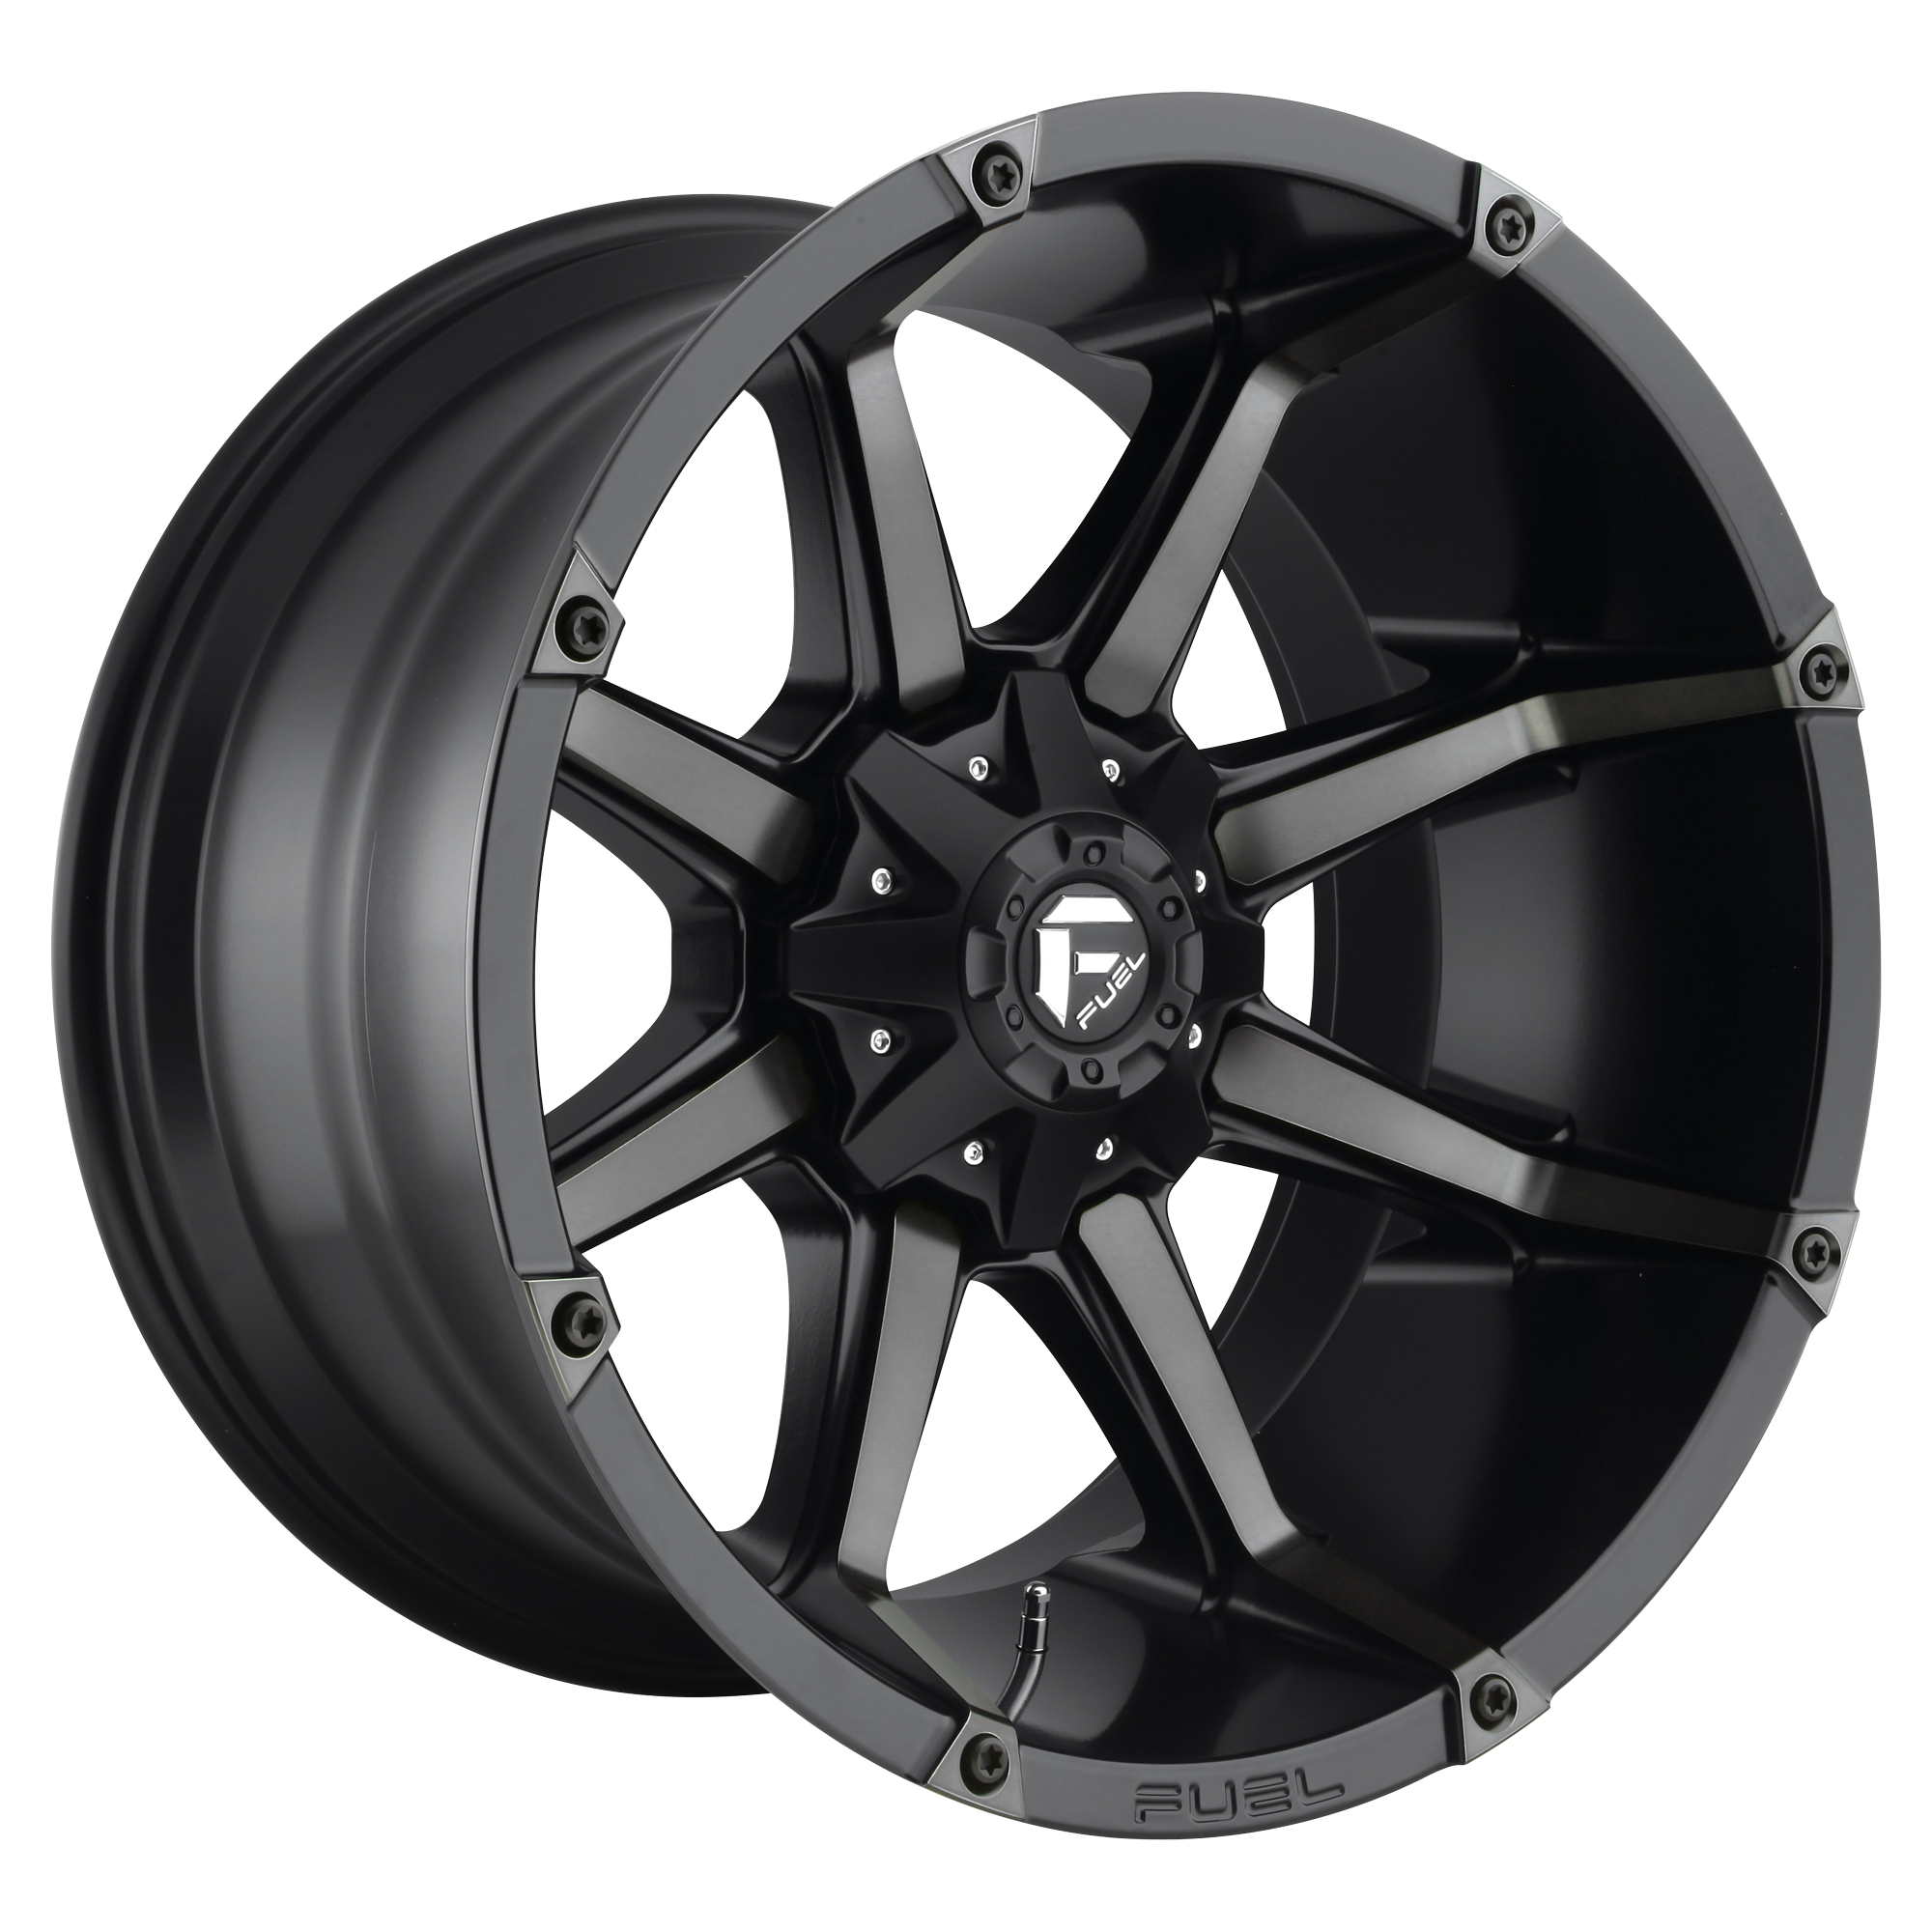 COUPLER 18x9 5x114.30/5x127.00 MATTE BLACK DOUBLE DARK TINT (-12 mm) - Tires and Engine Performance